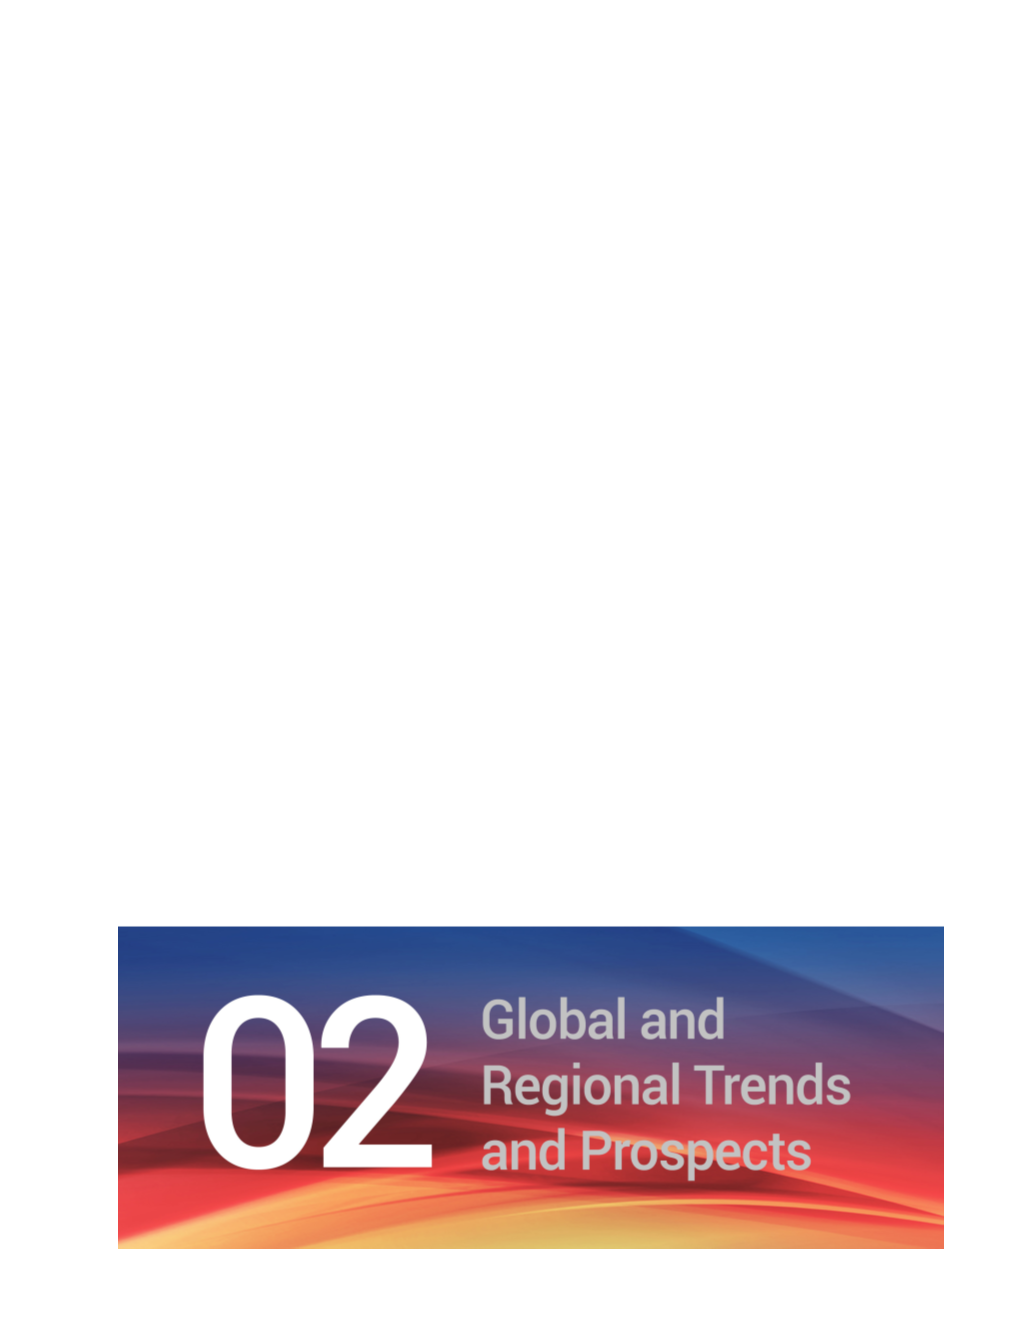 Chapter 2 Global and Regional Trends and Prospects | 9 10 | SOCCSKSARGEN Regional Development Plan 2017-2022 Chapter 2 Global and Regional Trends And